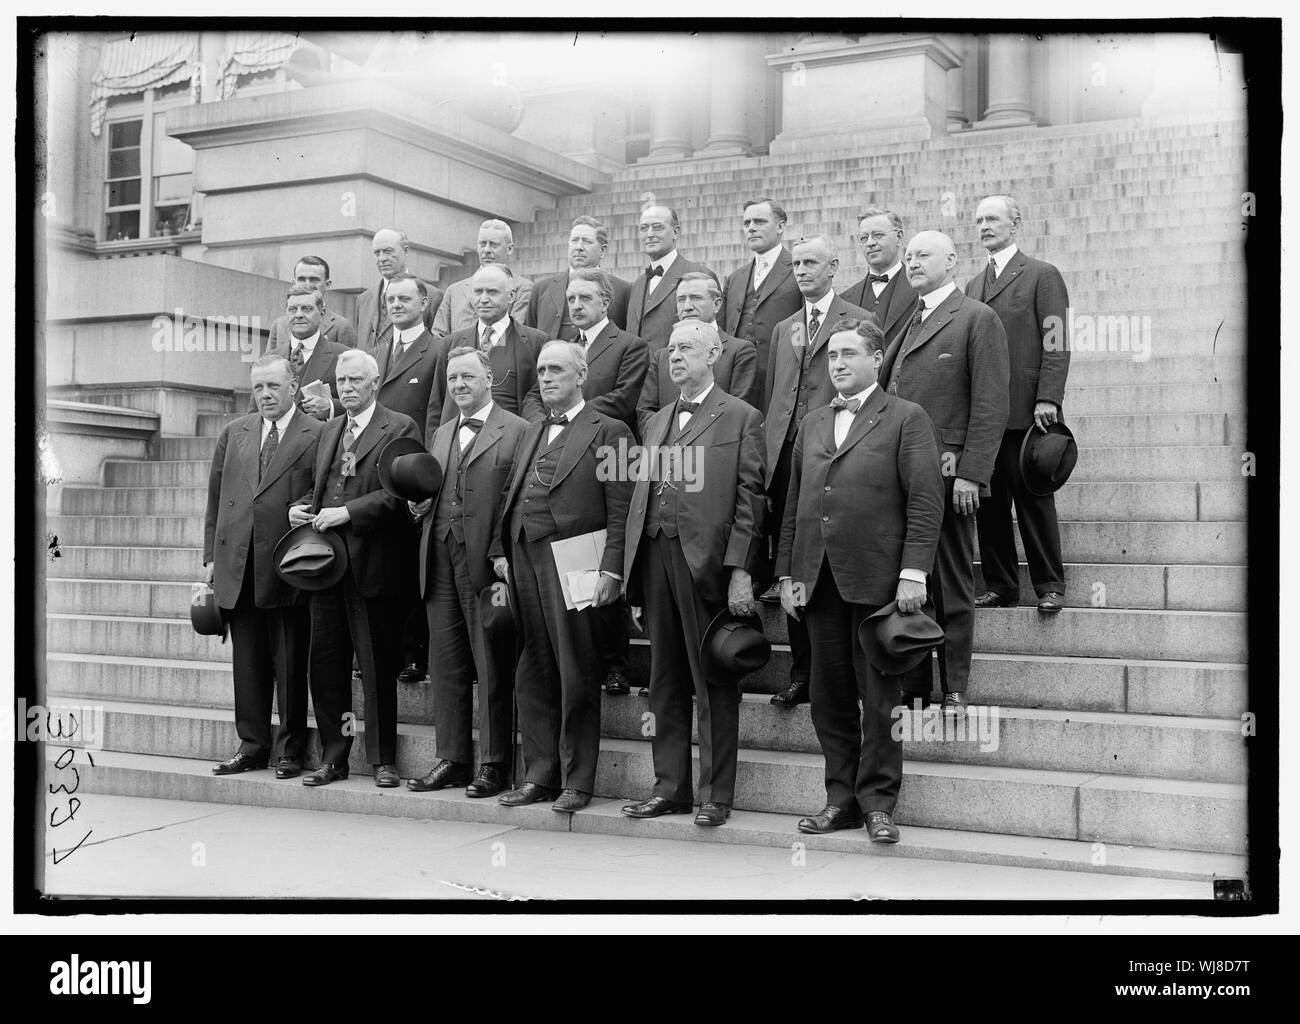 HOUSE OF REPRESENTATIVES. COMMITTEES. NAVAL AFFAIRS. ON NAVY DEPT. STEPS. FRONT: RIORDAN, DANIEL JOSEPH, OF NY; BUTLER, THOMAS STALKER OF PA; SEC. JOSEPHUS DANIELS; PADGETT, LEMUEL PHILLIPS, OF TN, CHAIRMAN; BROWNING, WILLIAM JOHN, OF NJ; McARTHUR, CLIFTON NESMITH, OF OR. 2ND ROW: OLIVER, WILLIAM BACON, OF AL; VINSON OF GA; KELLY, PATRICK HENRY OF MI.;HICKS, FRED. C.OF NY; BRITTEN, FRED A. OF IL; DARROW, GEORGE P., OF PA; STEPHENS OF OH. 3RD ROW: UNIDENTIFIED Stock Photo